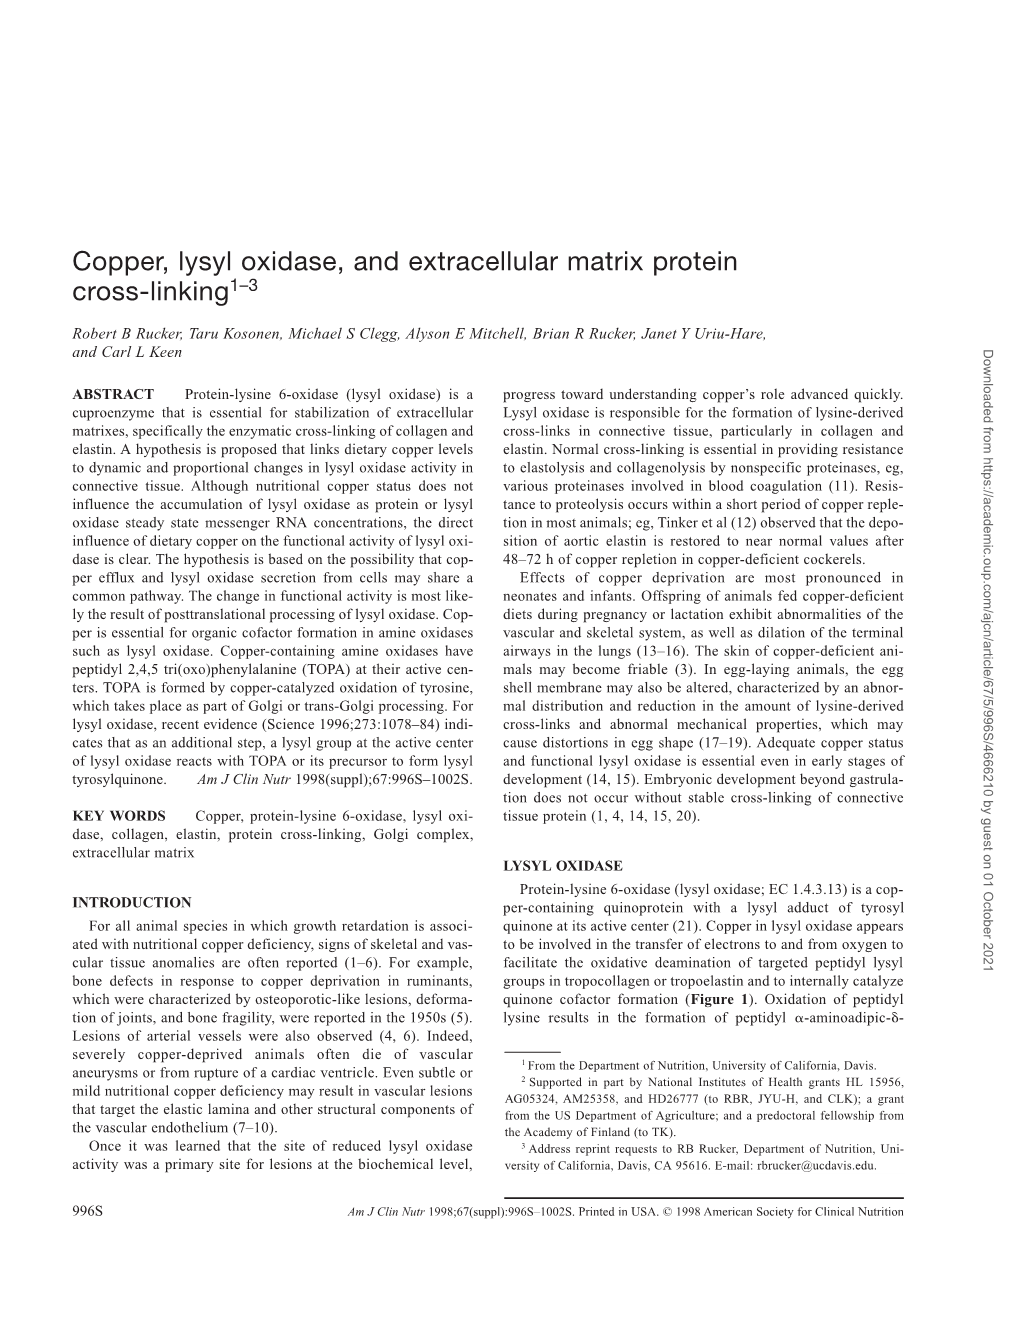 Copper, Lysyl Oxidase, and Extracellular Matrix Protein Cross-Linking1–3